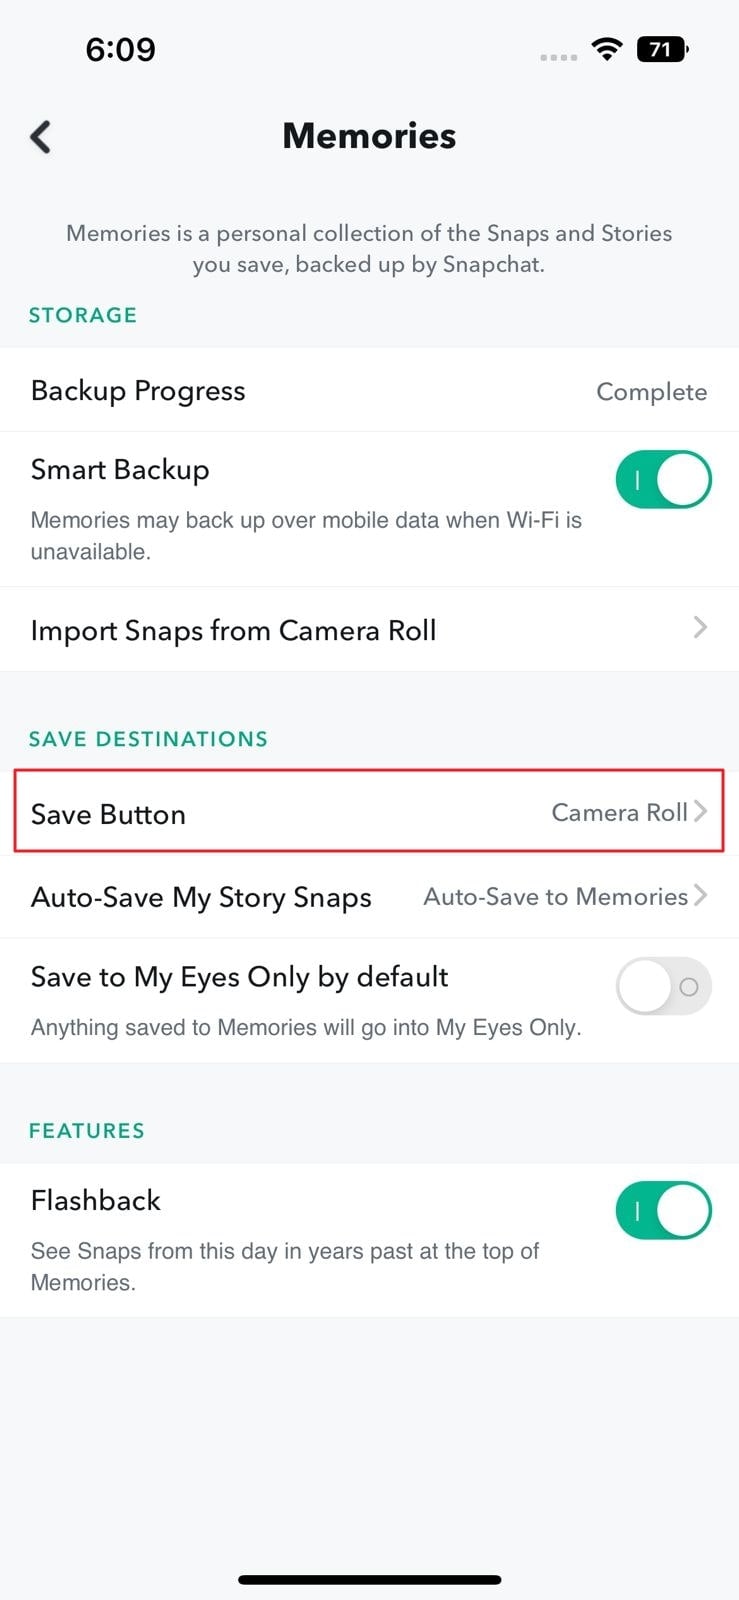 choose the save button option